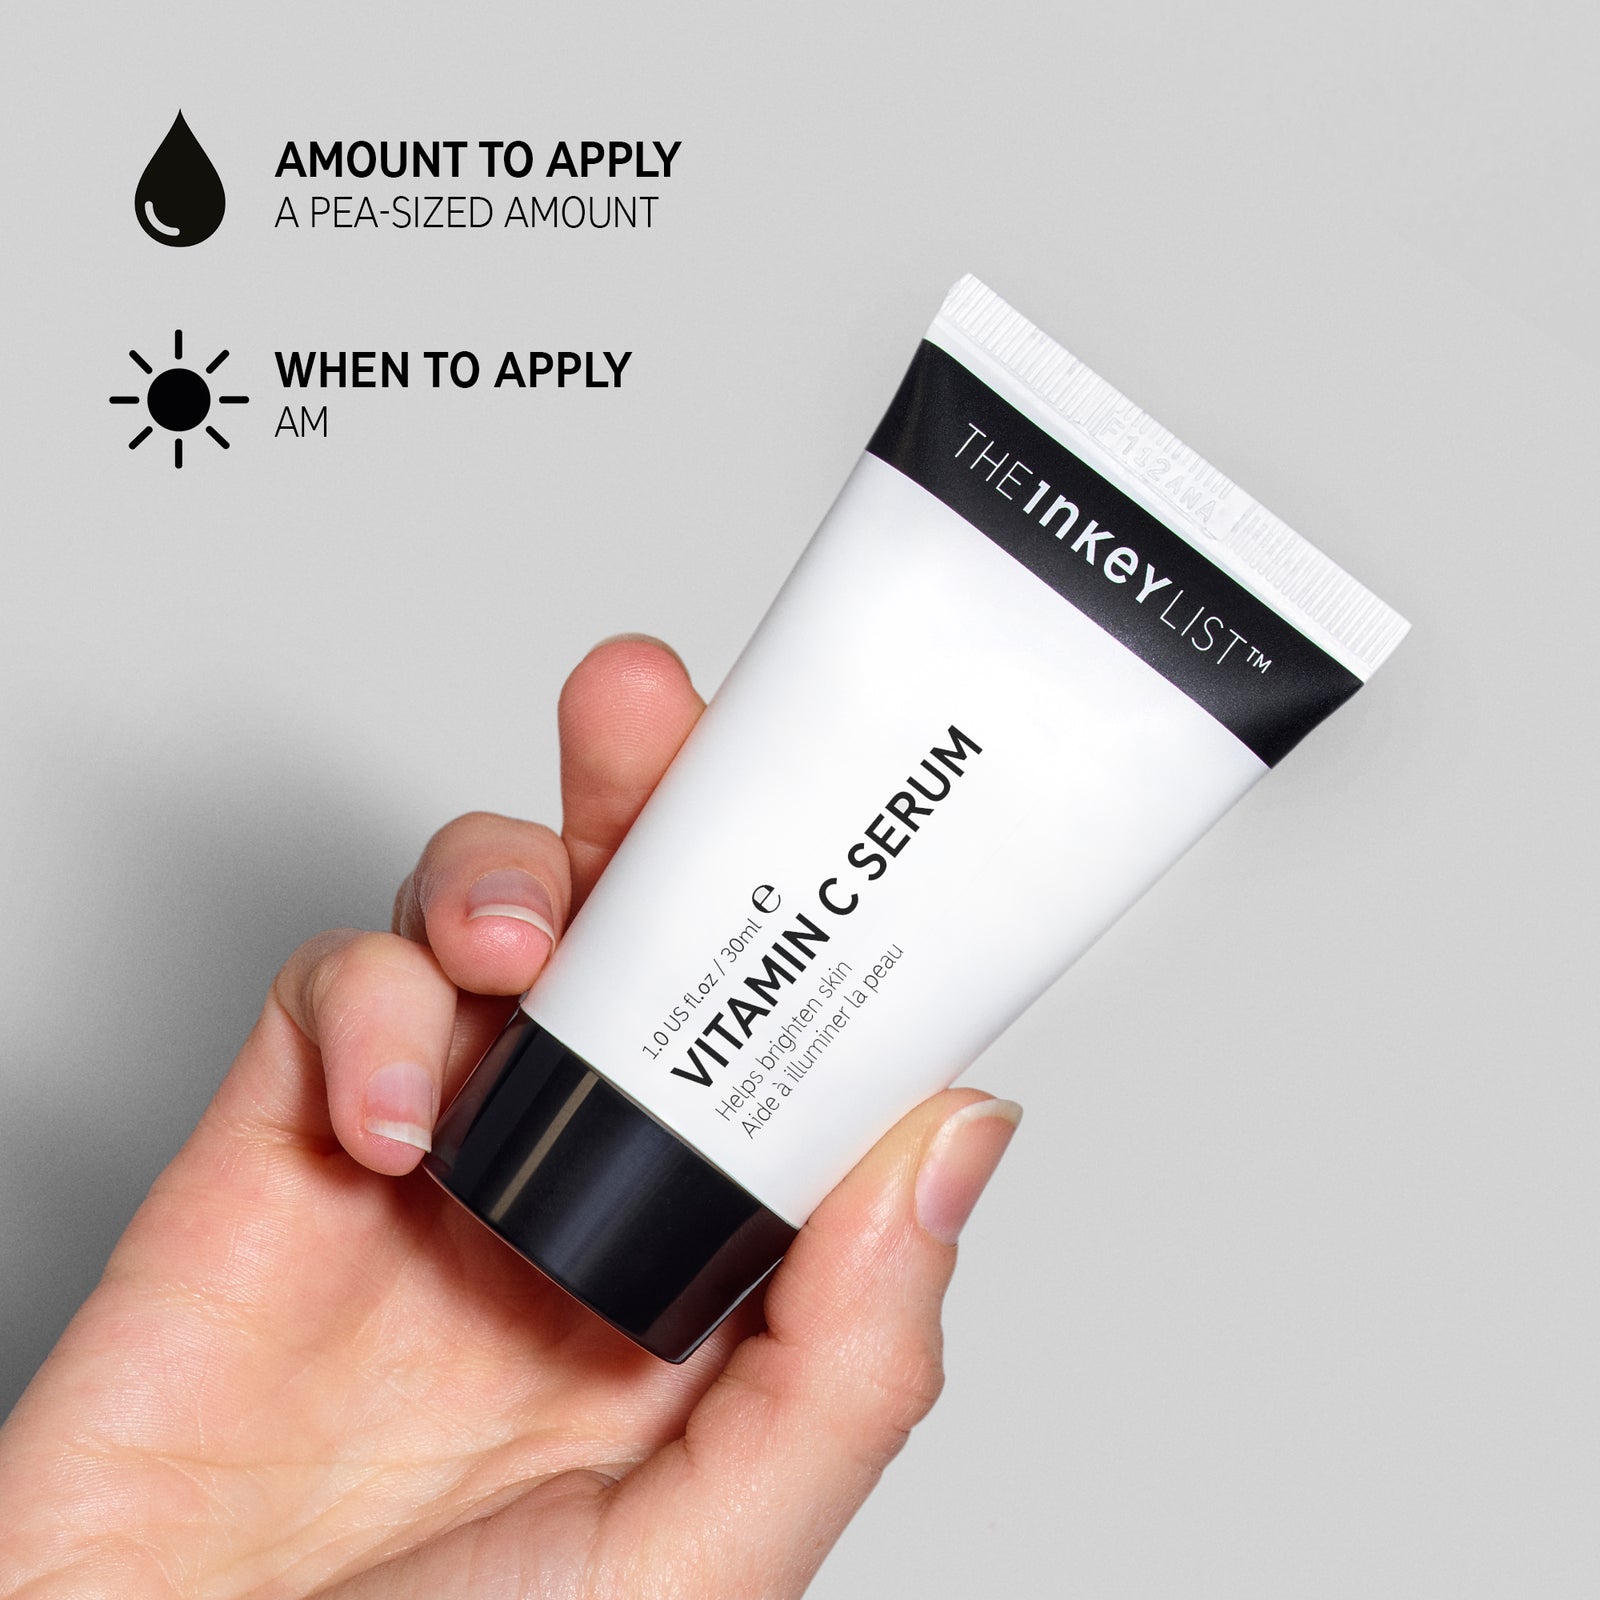 Hand holding a tube of Vitamin C Serum against a grey background annotated with black text to explain amount to apply (pea-sized amount) and when to use it in your skincare routine (AM only)